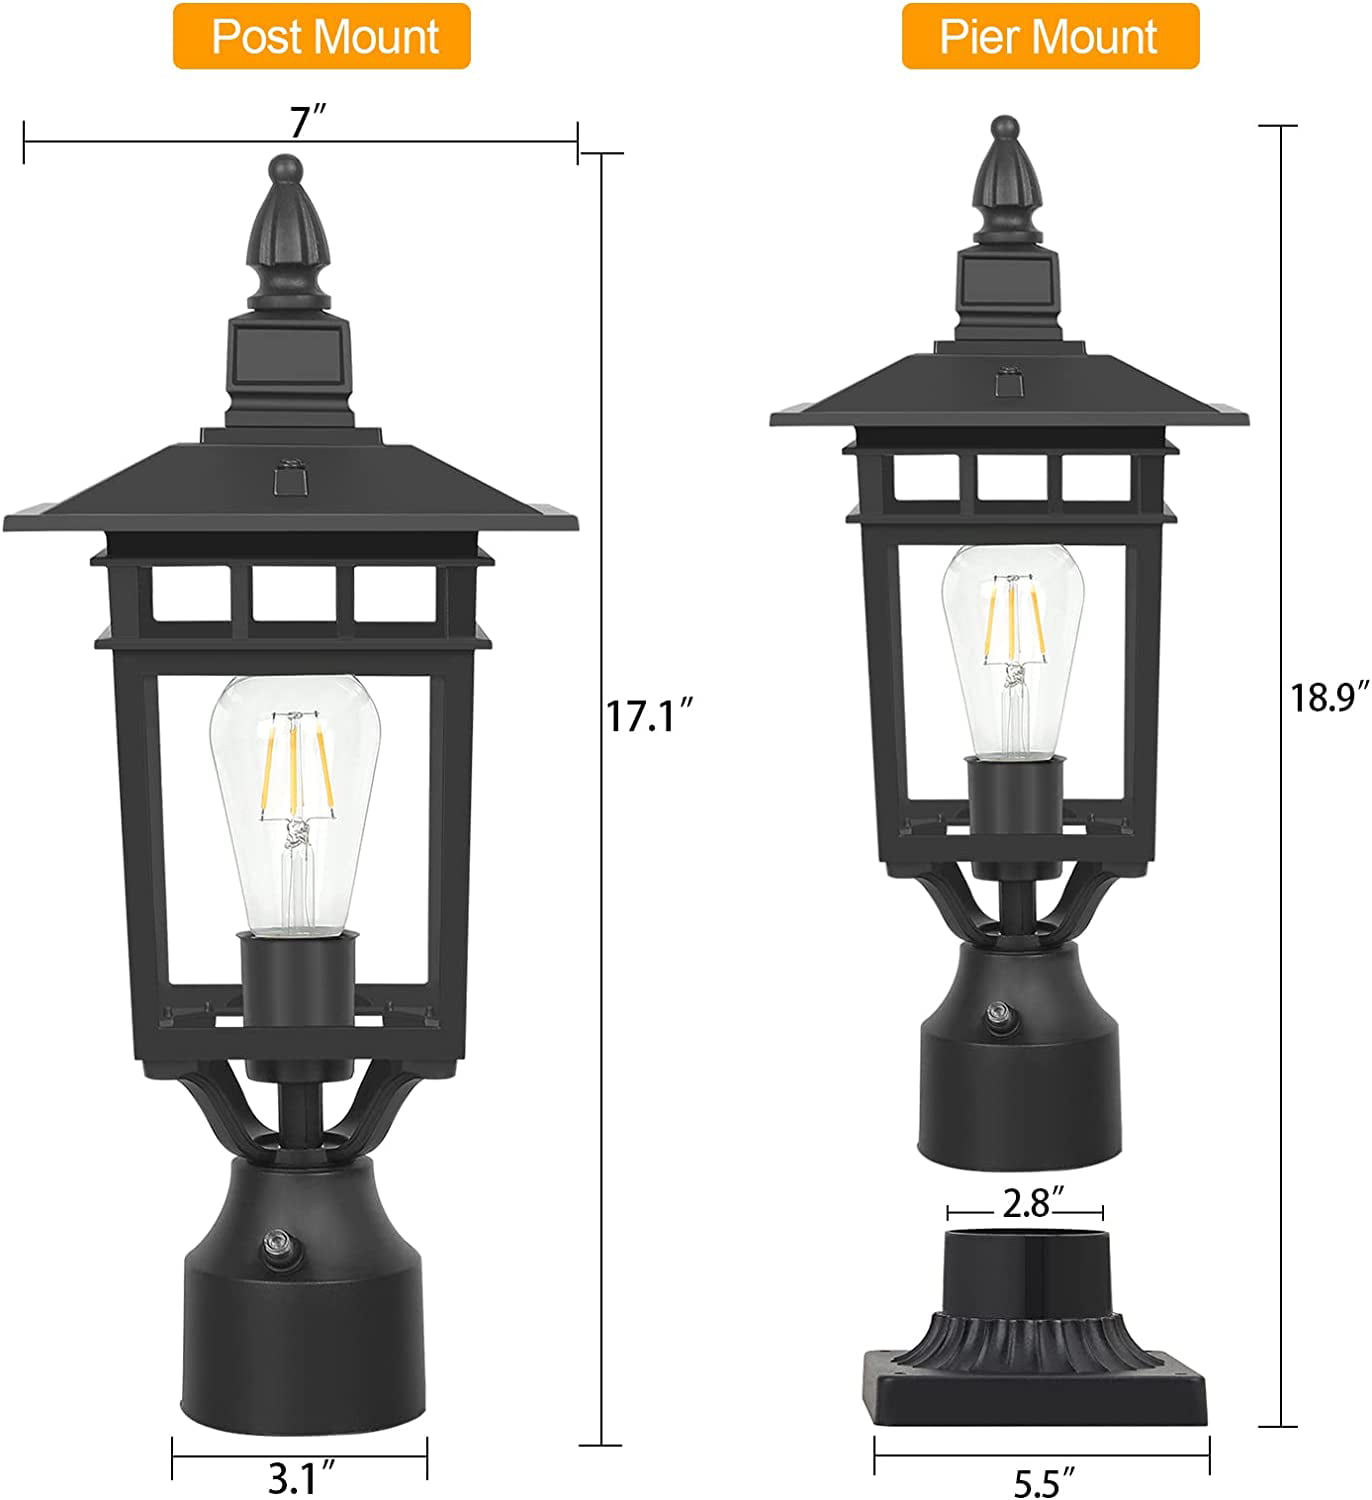 ZXNYH Outdoor Dusk to Dawn Post Light with Pier Mount Base Pack  Waterproof Dusk to Dawn Lamp Posts Outdoor Lighting Lamp Post Light Fixture  for Garden Park Driveway Pathway